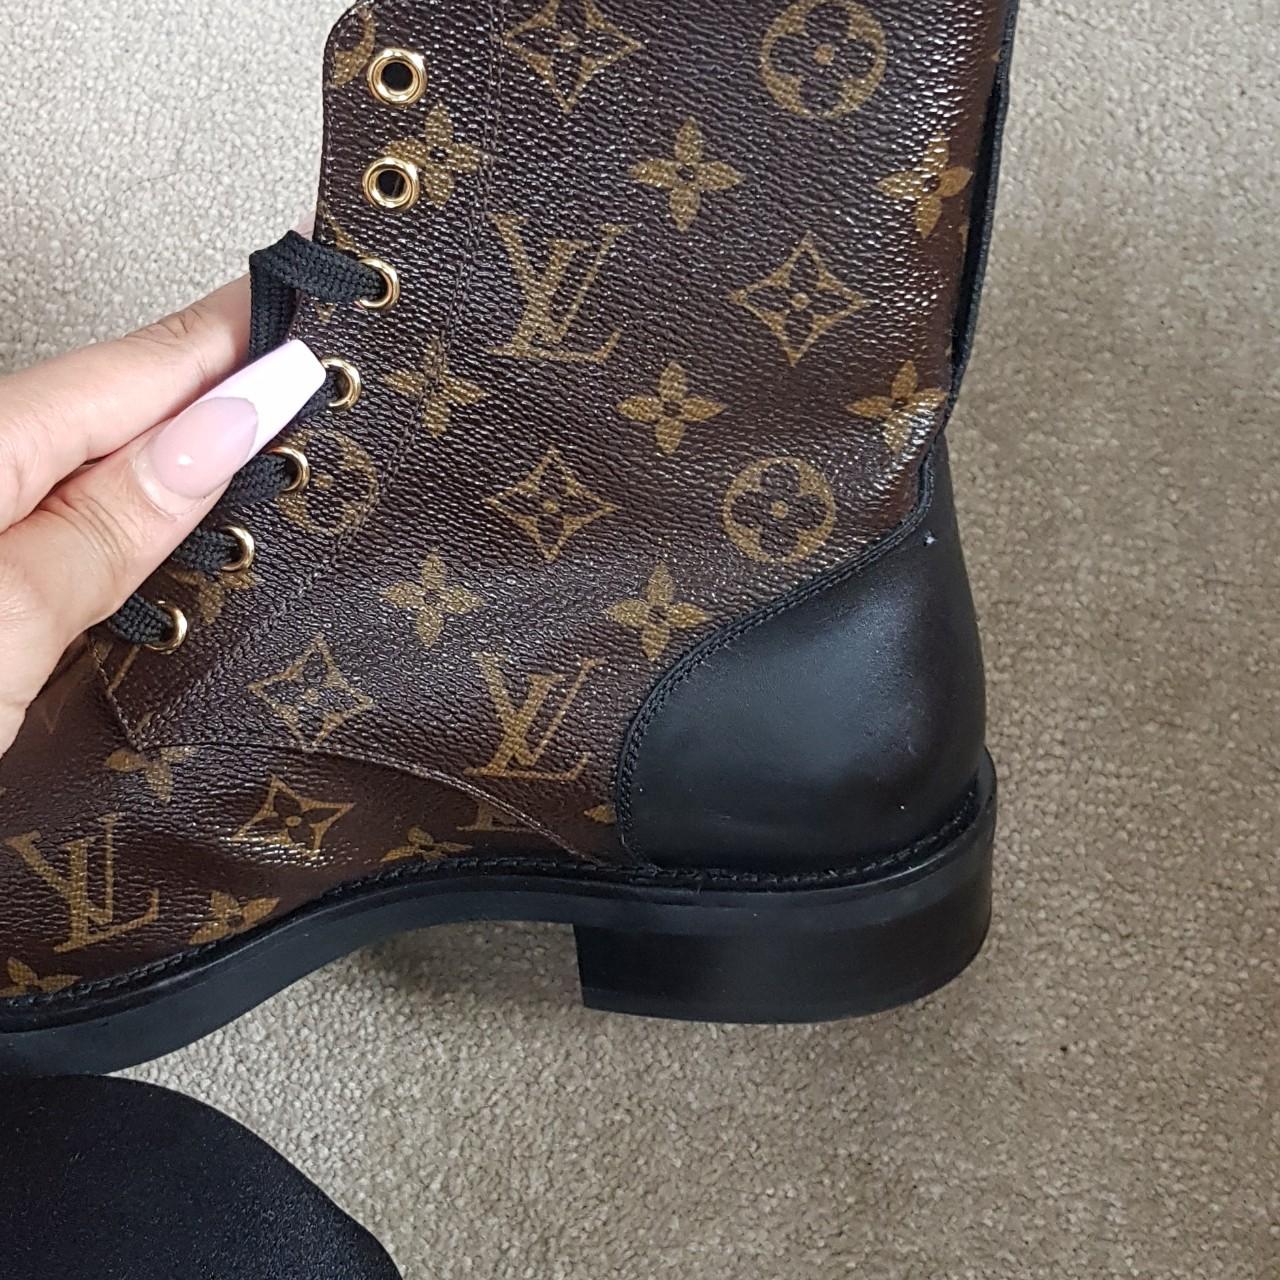 Louis Vuitton Wonderland Flat Ranger available 😍 What would you